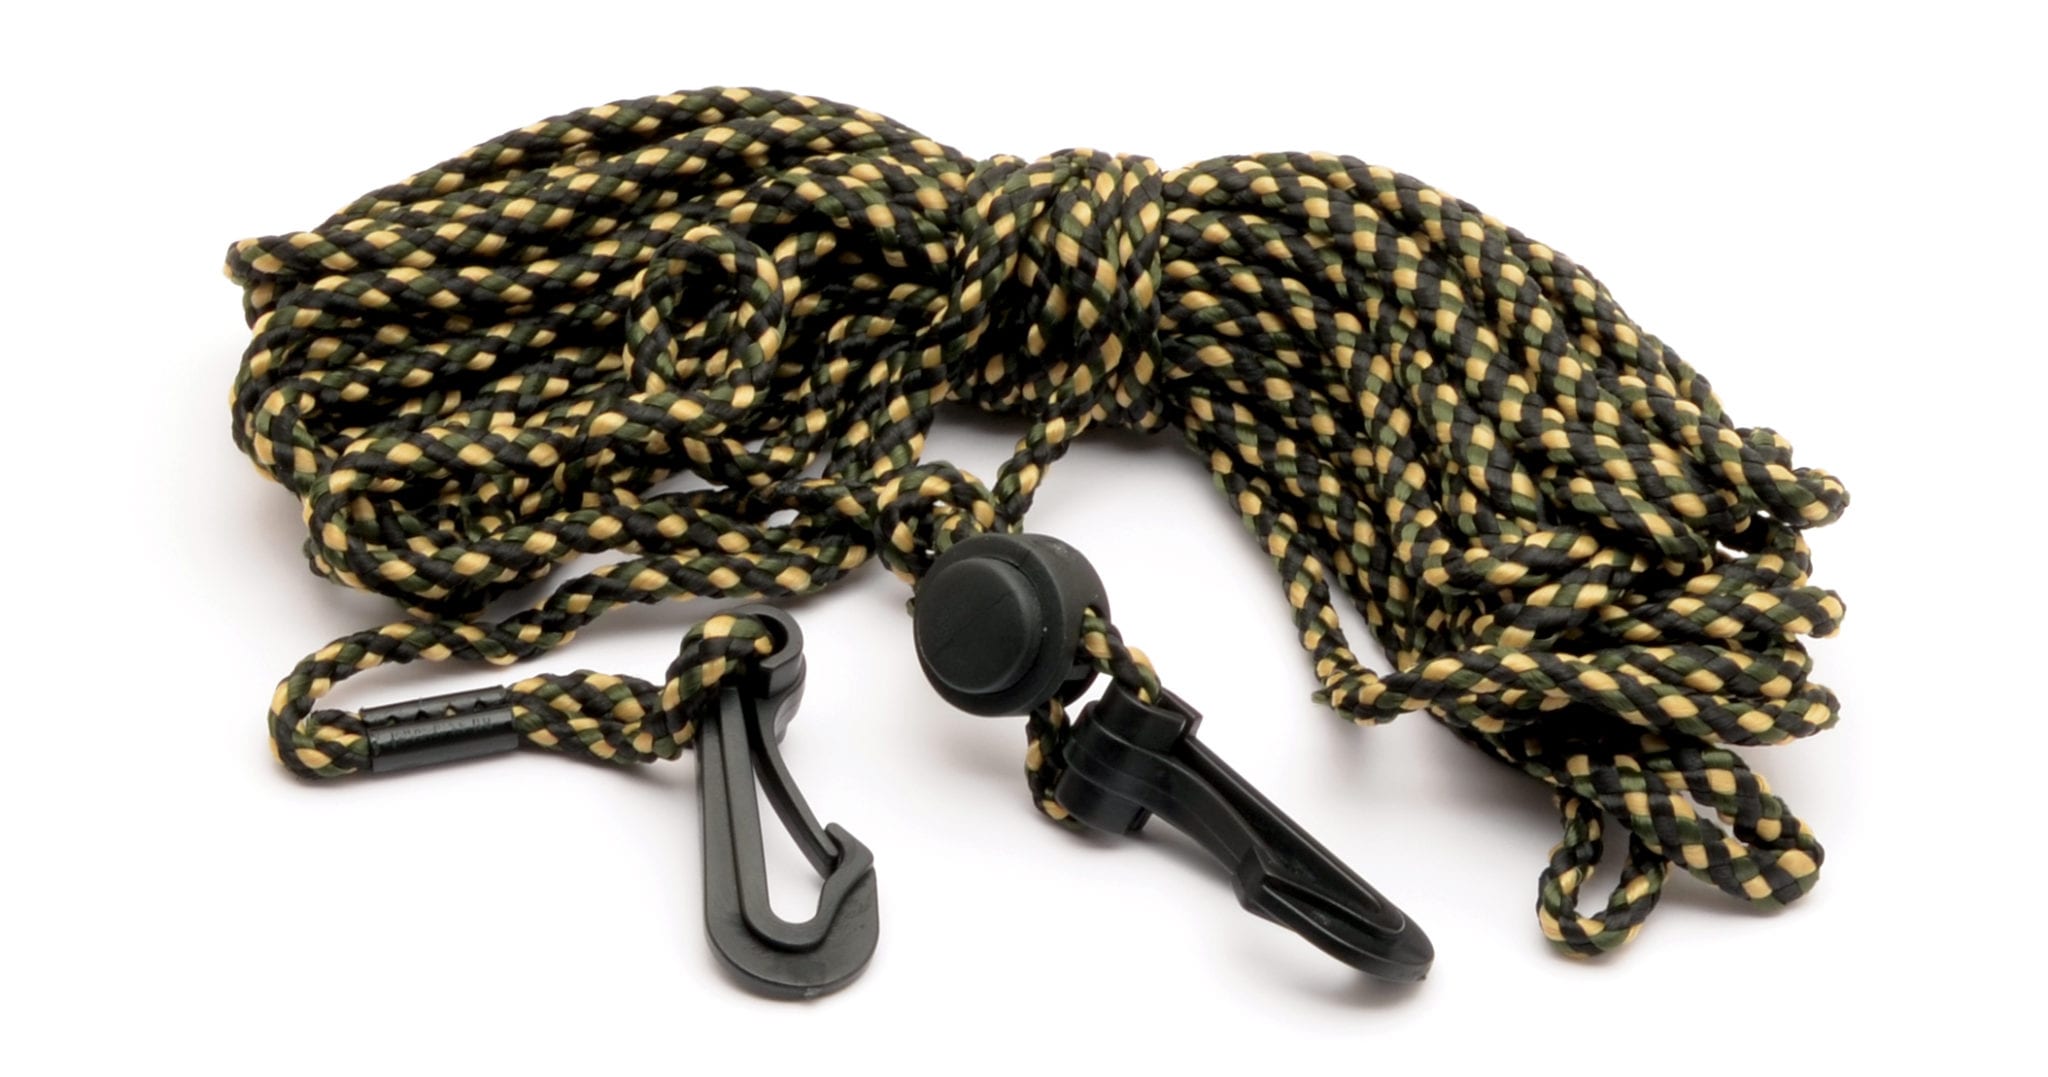 NEW HME Gear and Bow Hoist Rope 25 Foot Length HME-GBHR Hunting Made Easy! 